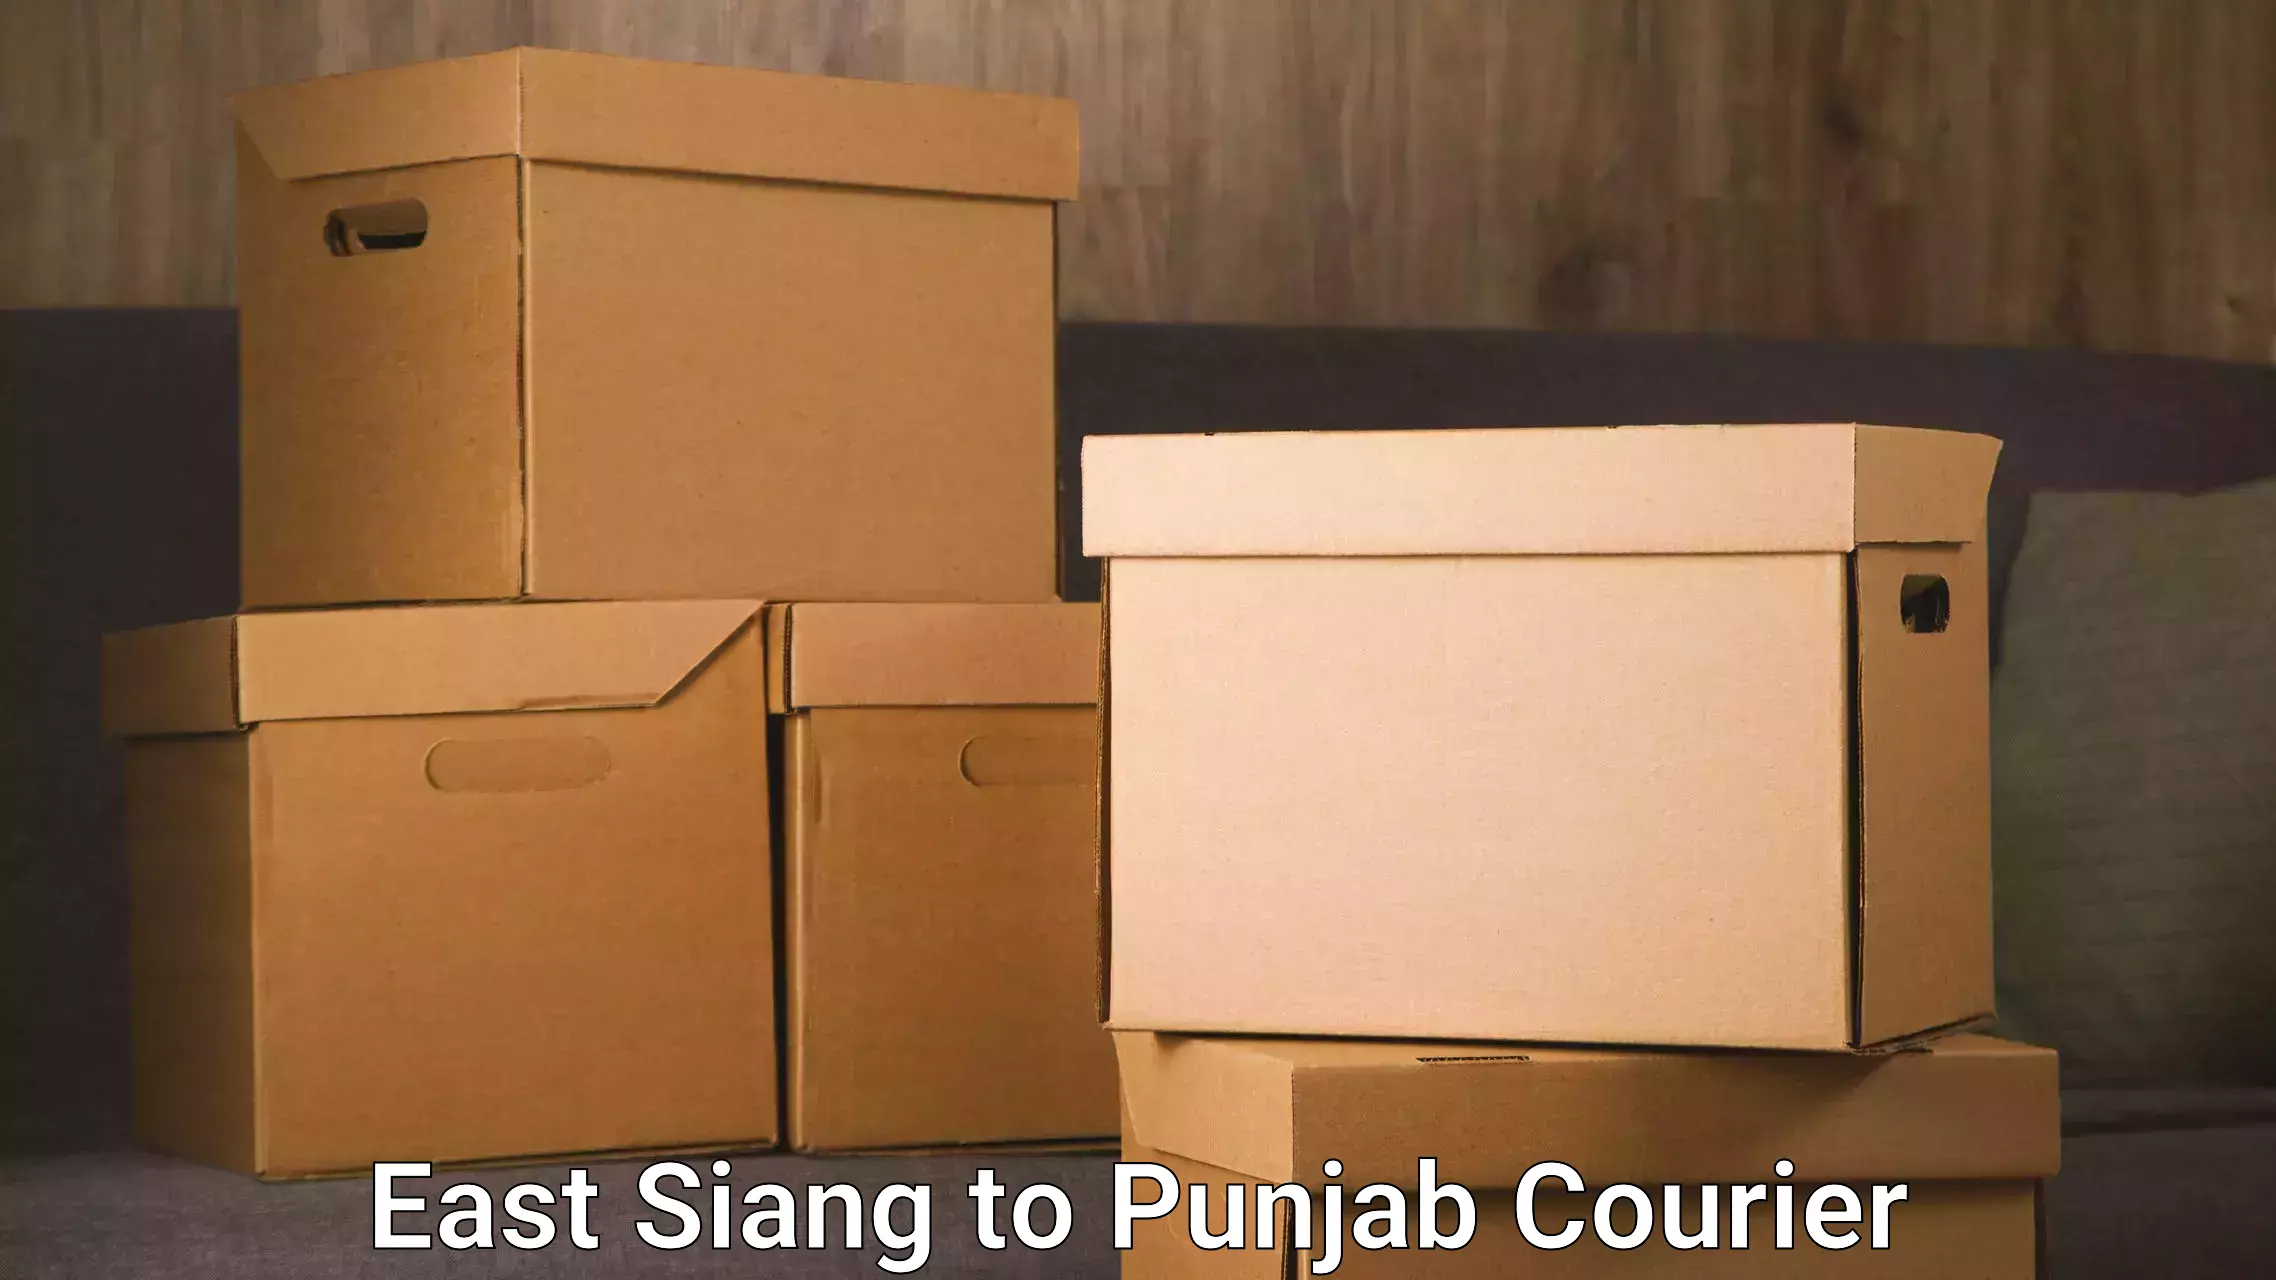 Full-service courier options East Siang to Kapurthala